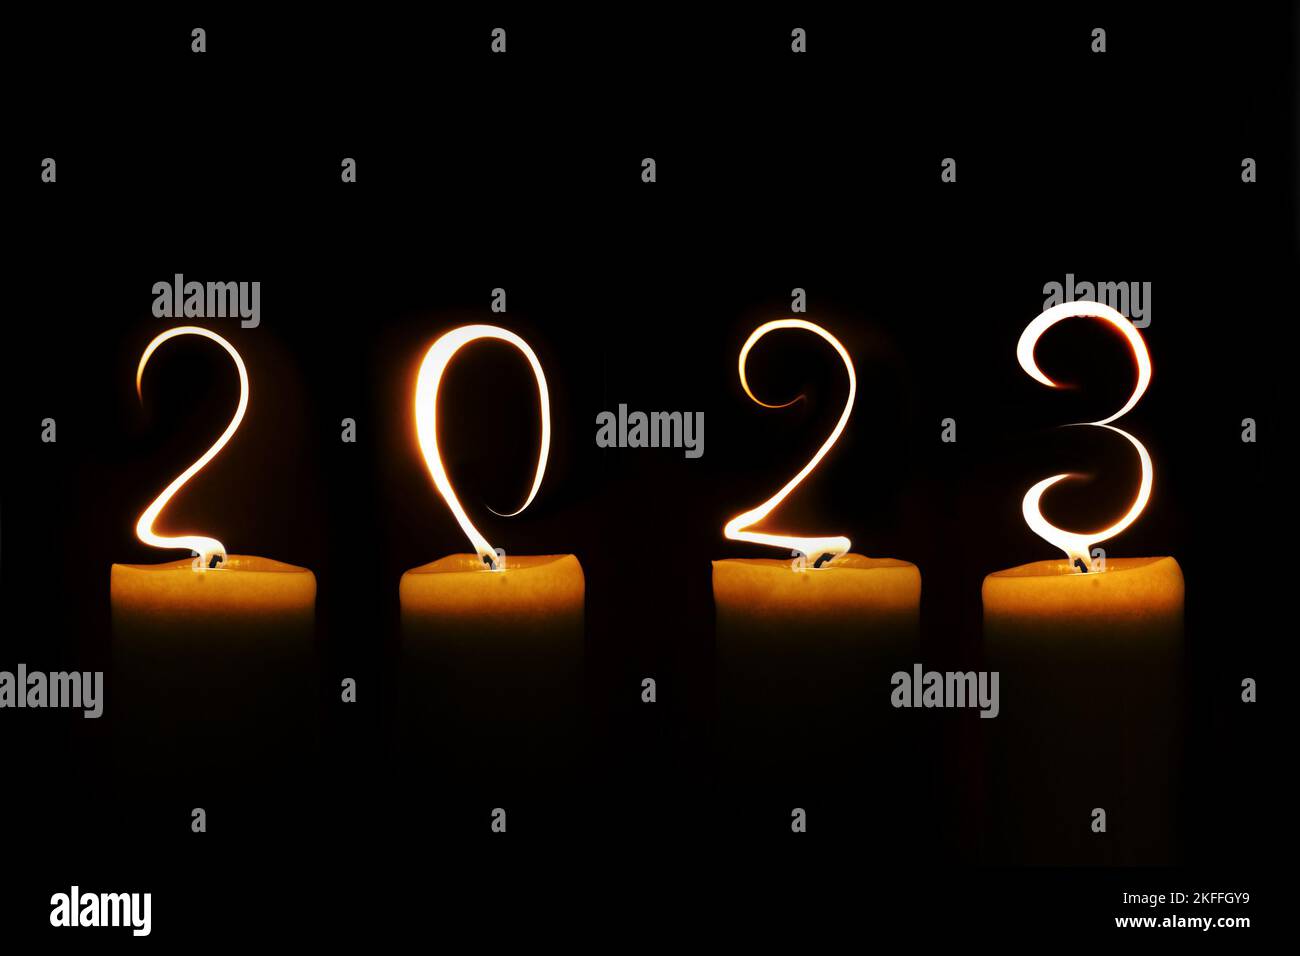 2023 written with candle flames on black background, new year greeting card Stock Photo